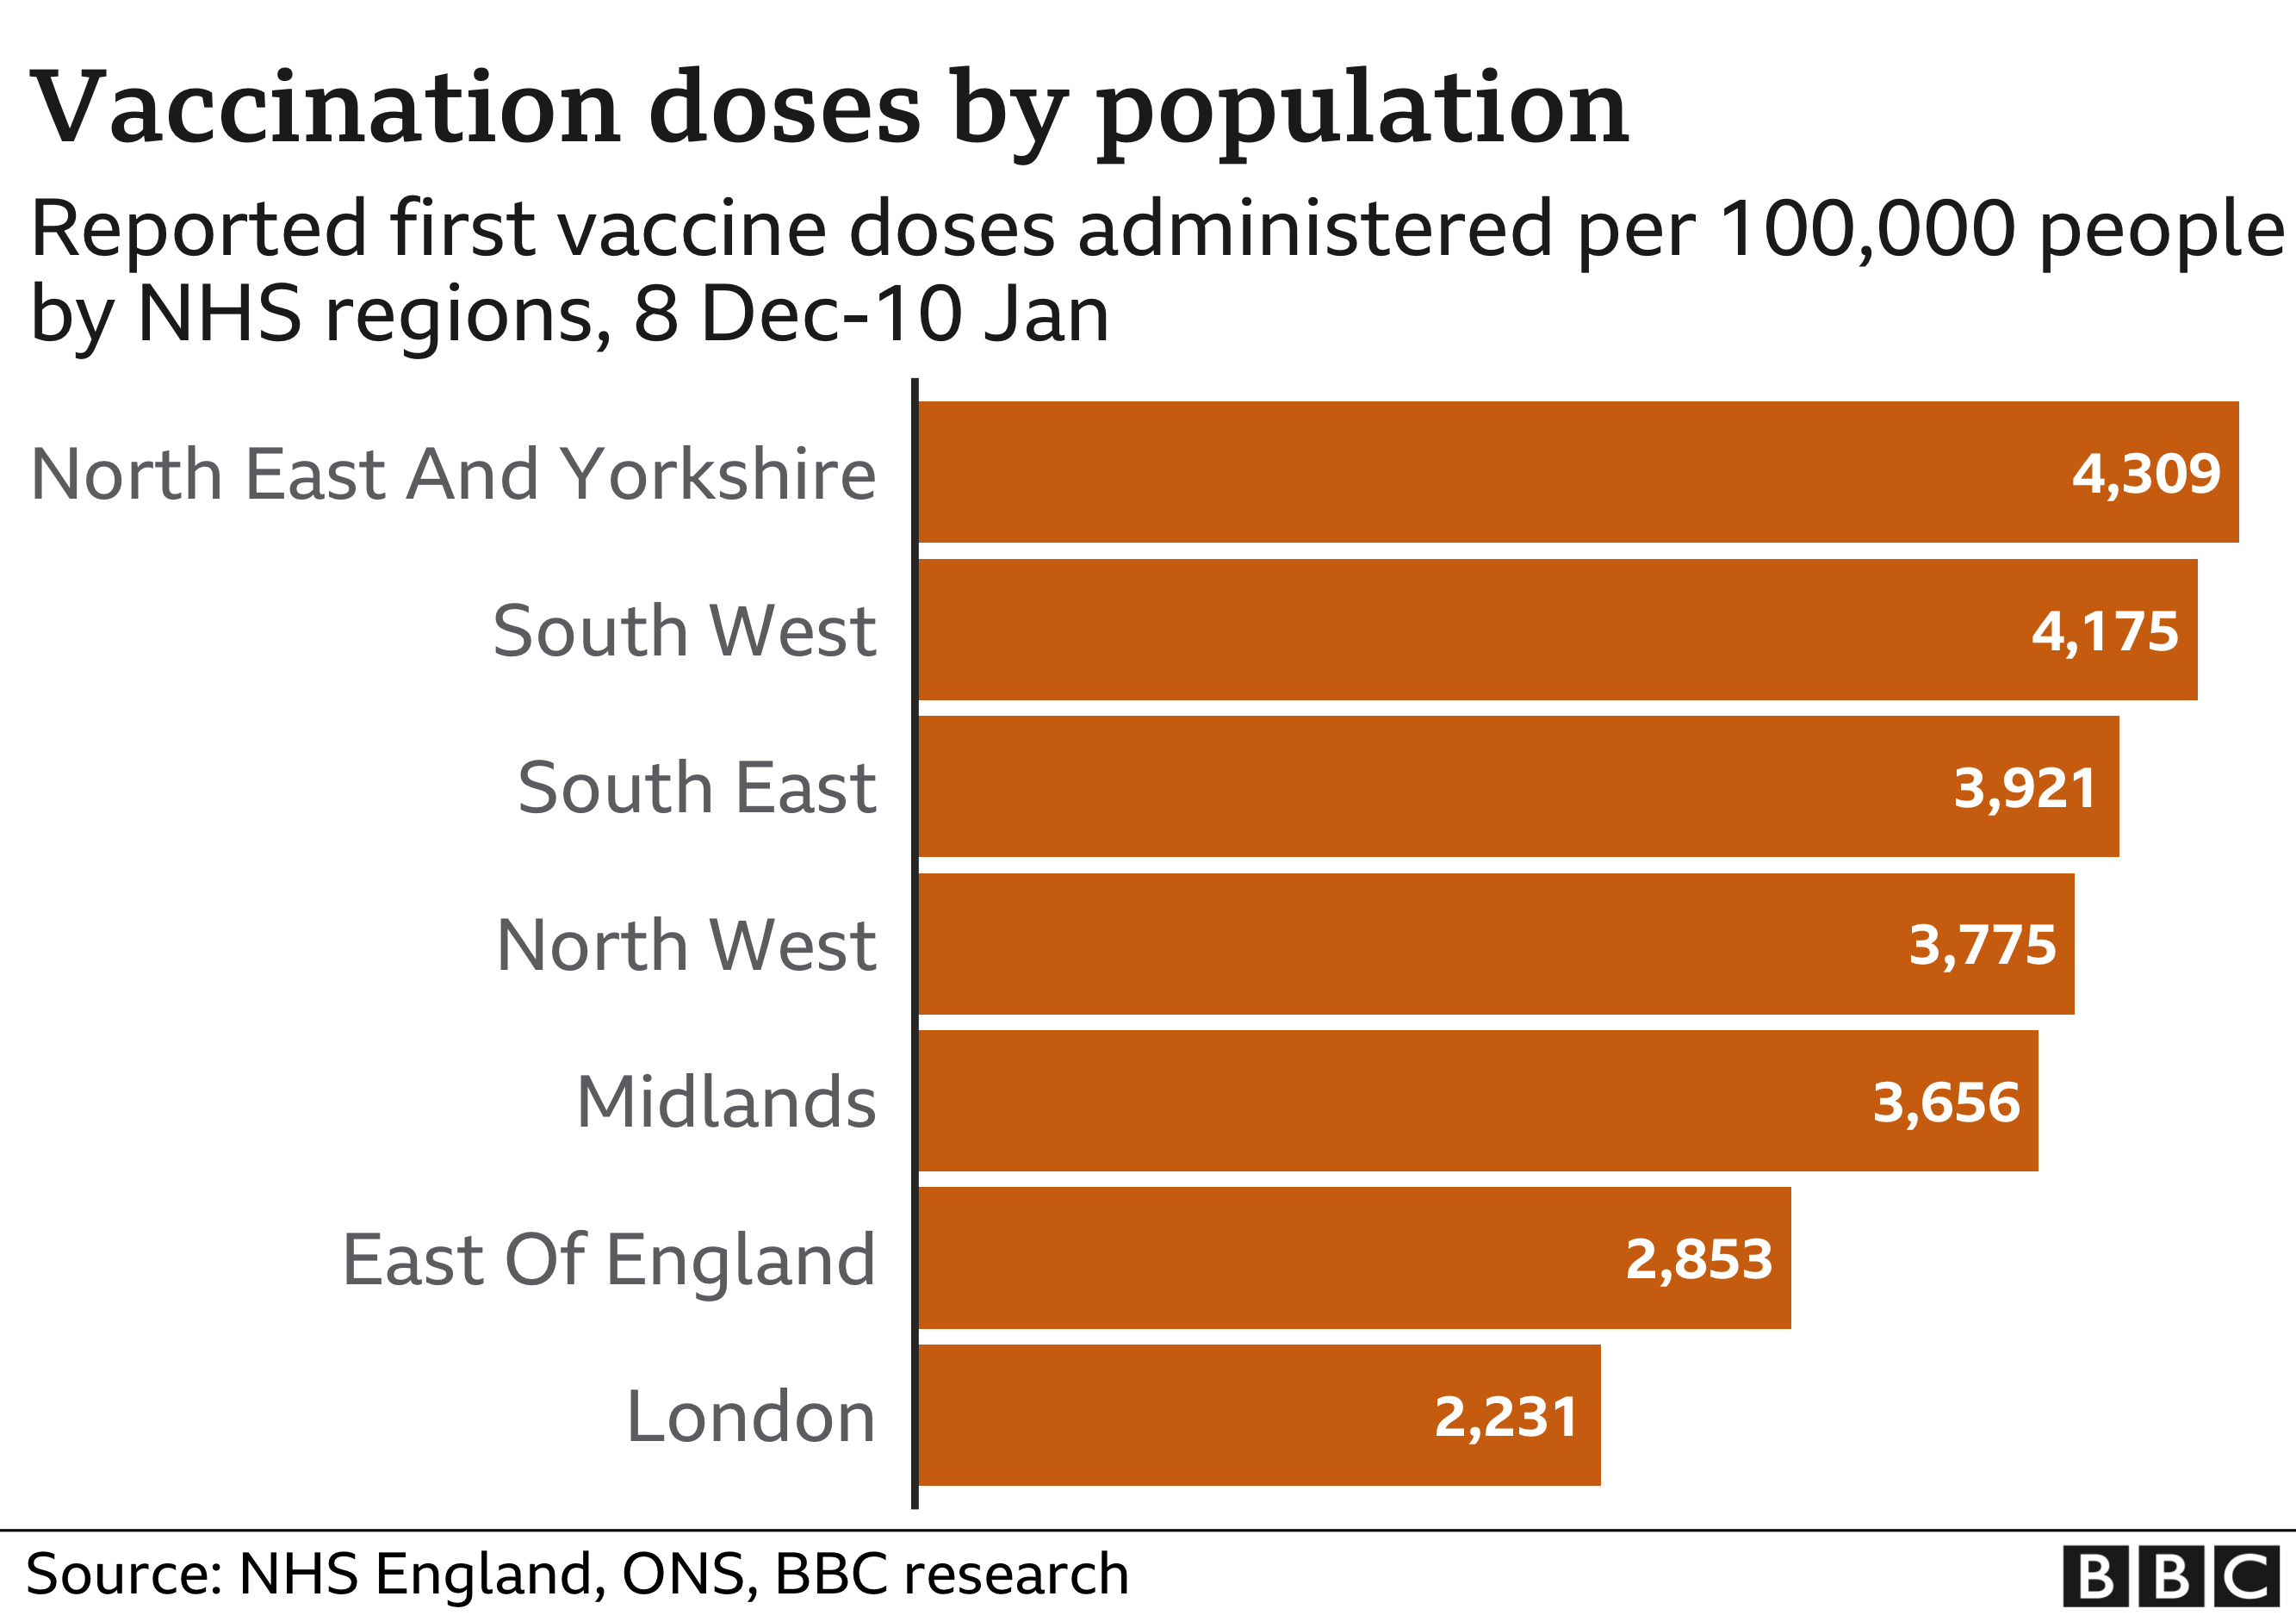 Covid vaccine doses by population in England by region